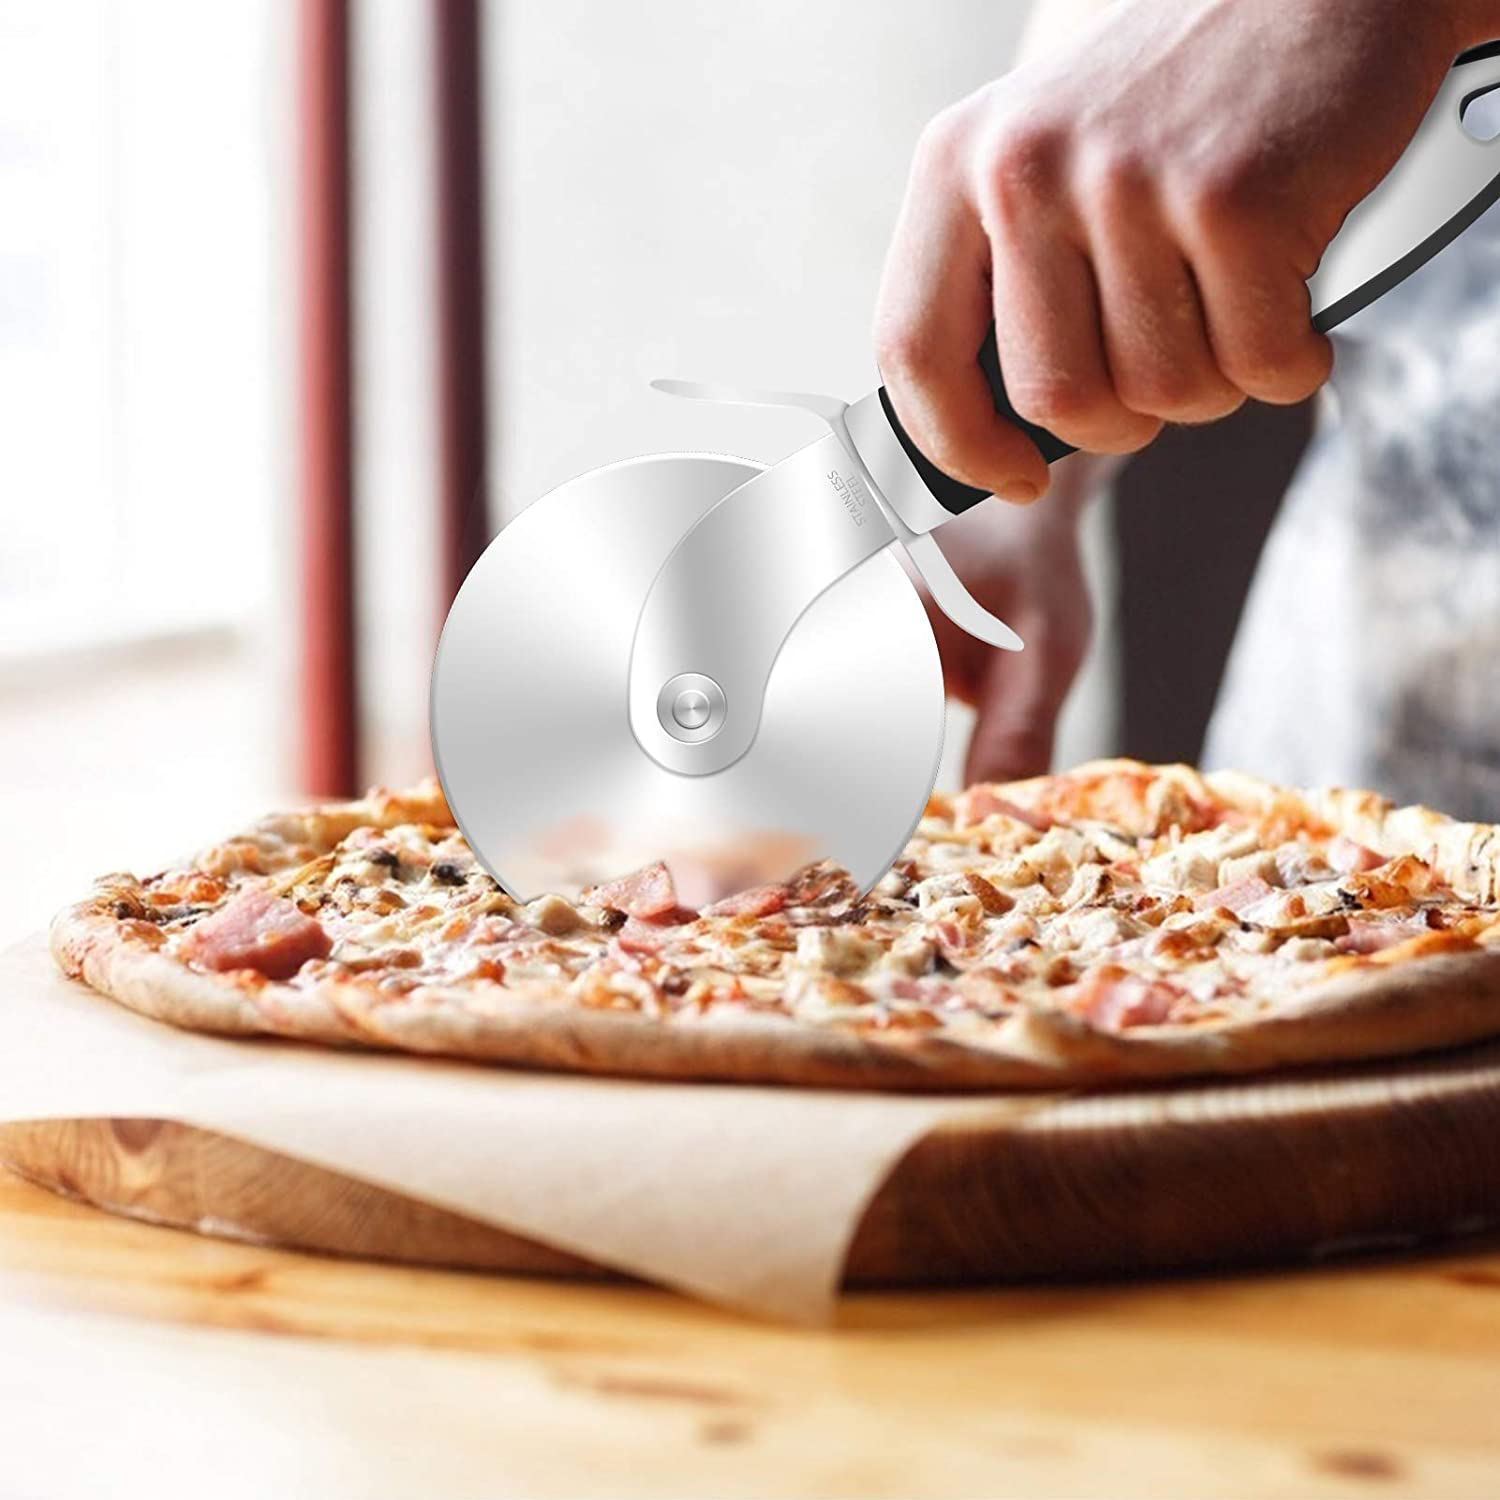 KUFUNG Pizza Cutter Wheel, Super Sharp Pizza Slicer with Non Slip Handle for Pizza, Pies, Waffles and Dough Cookies, Easy to Use and Clean (Silver, 8.3 Inch)